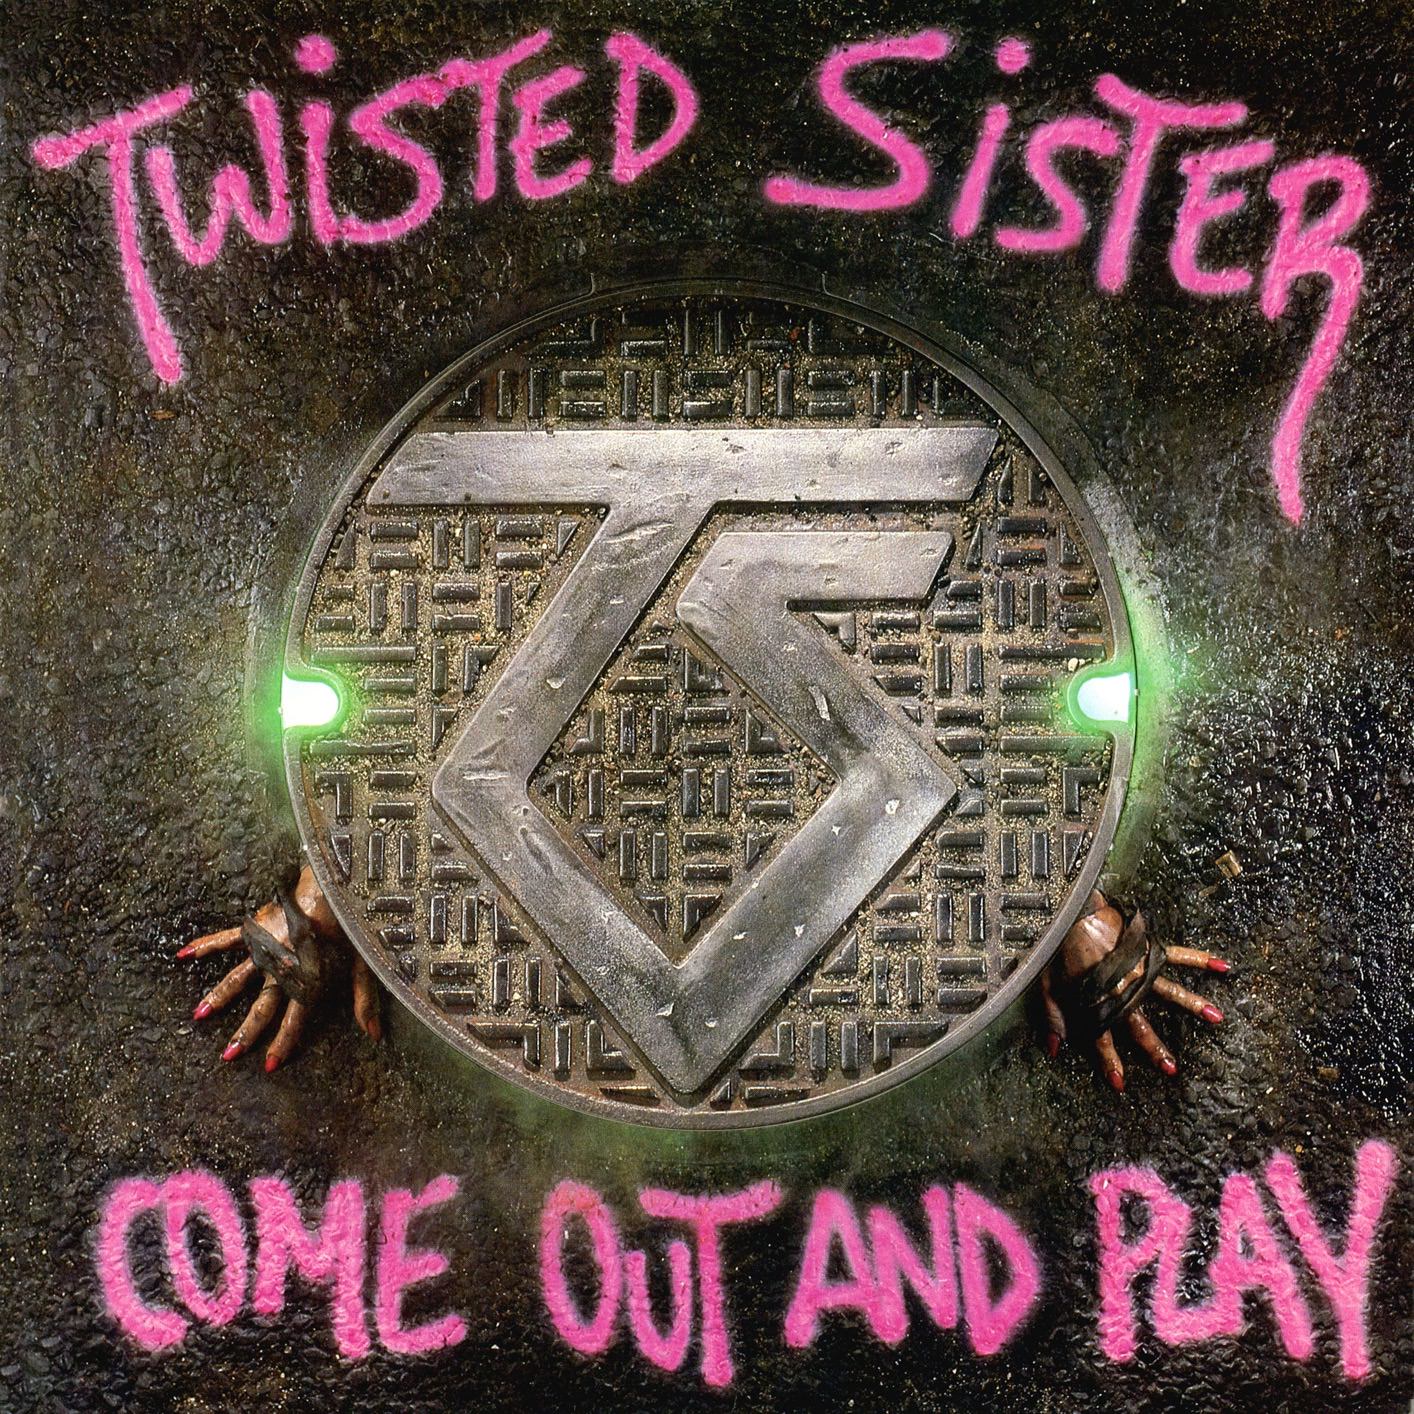 Twisted Sister - Come Out And Play (1985/2017) [HDTracks FLAC 24bit/192kHz]